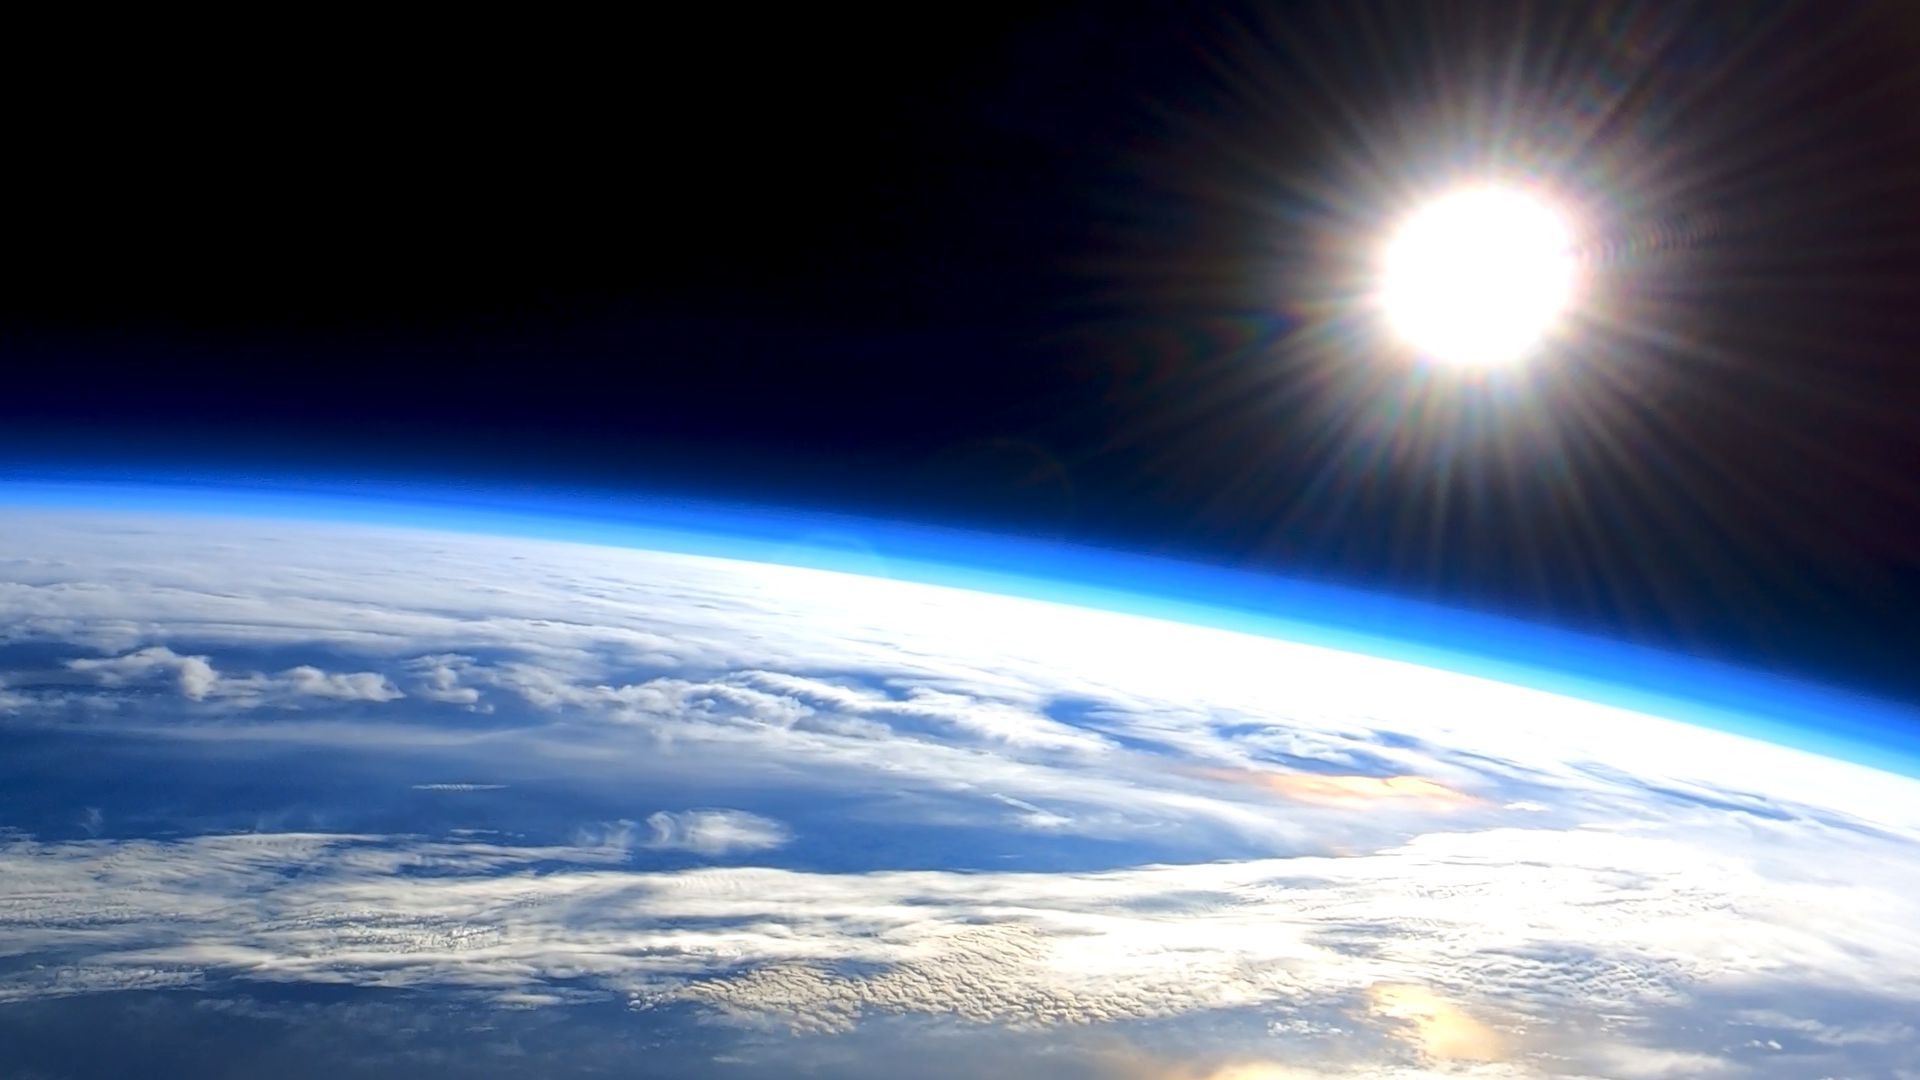 Photo of the sun over the earth's atmosphere from the viewpoint of space